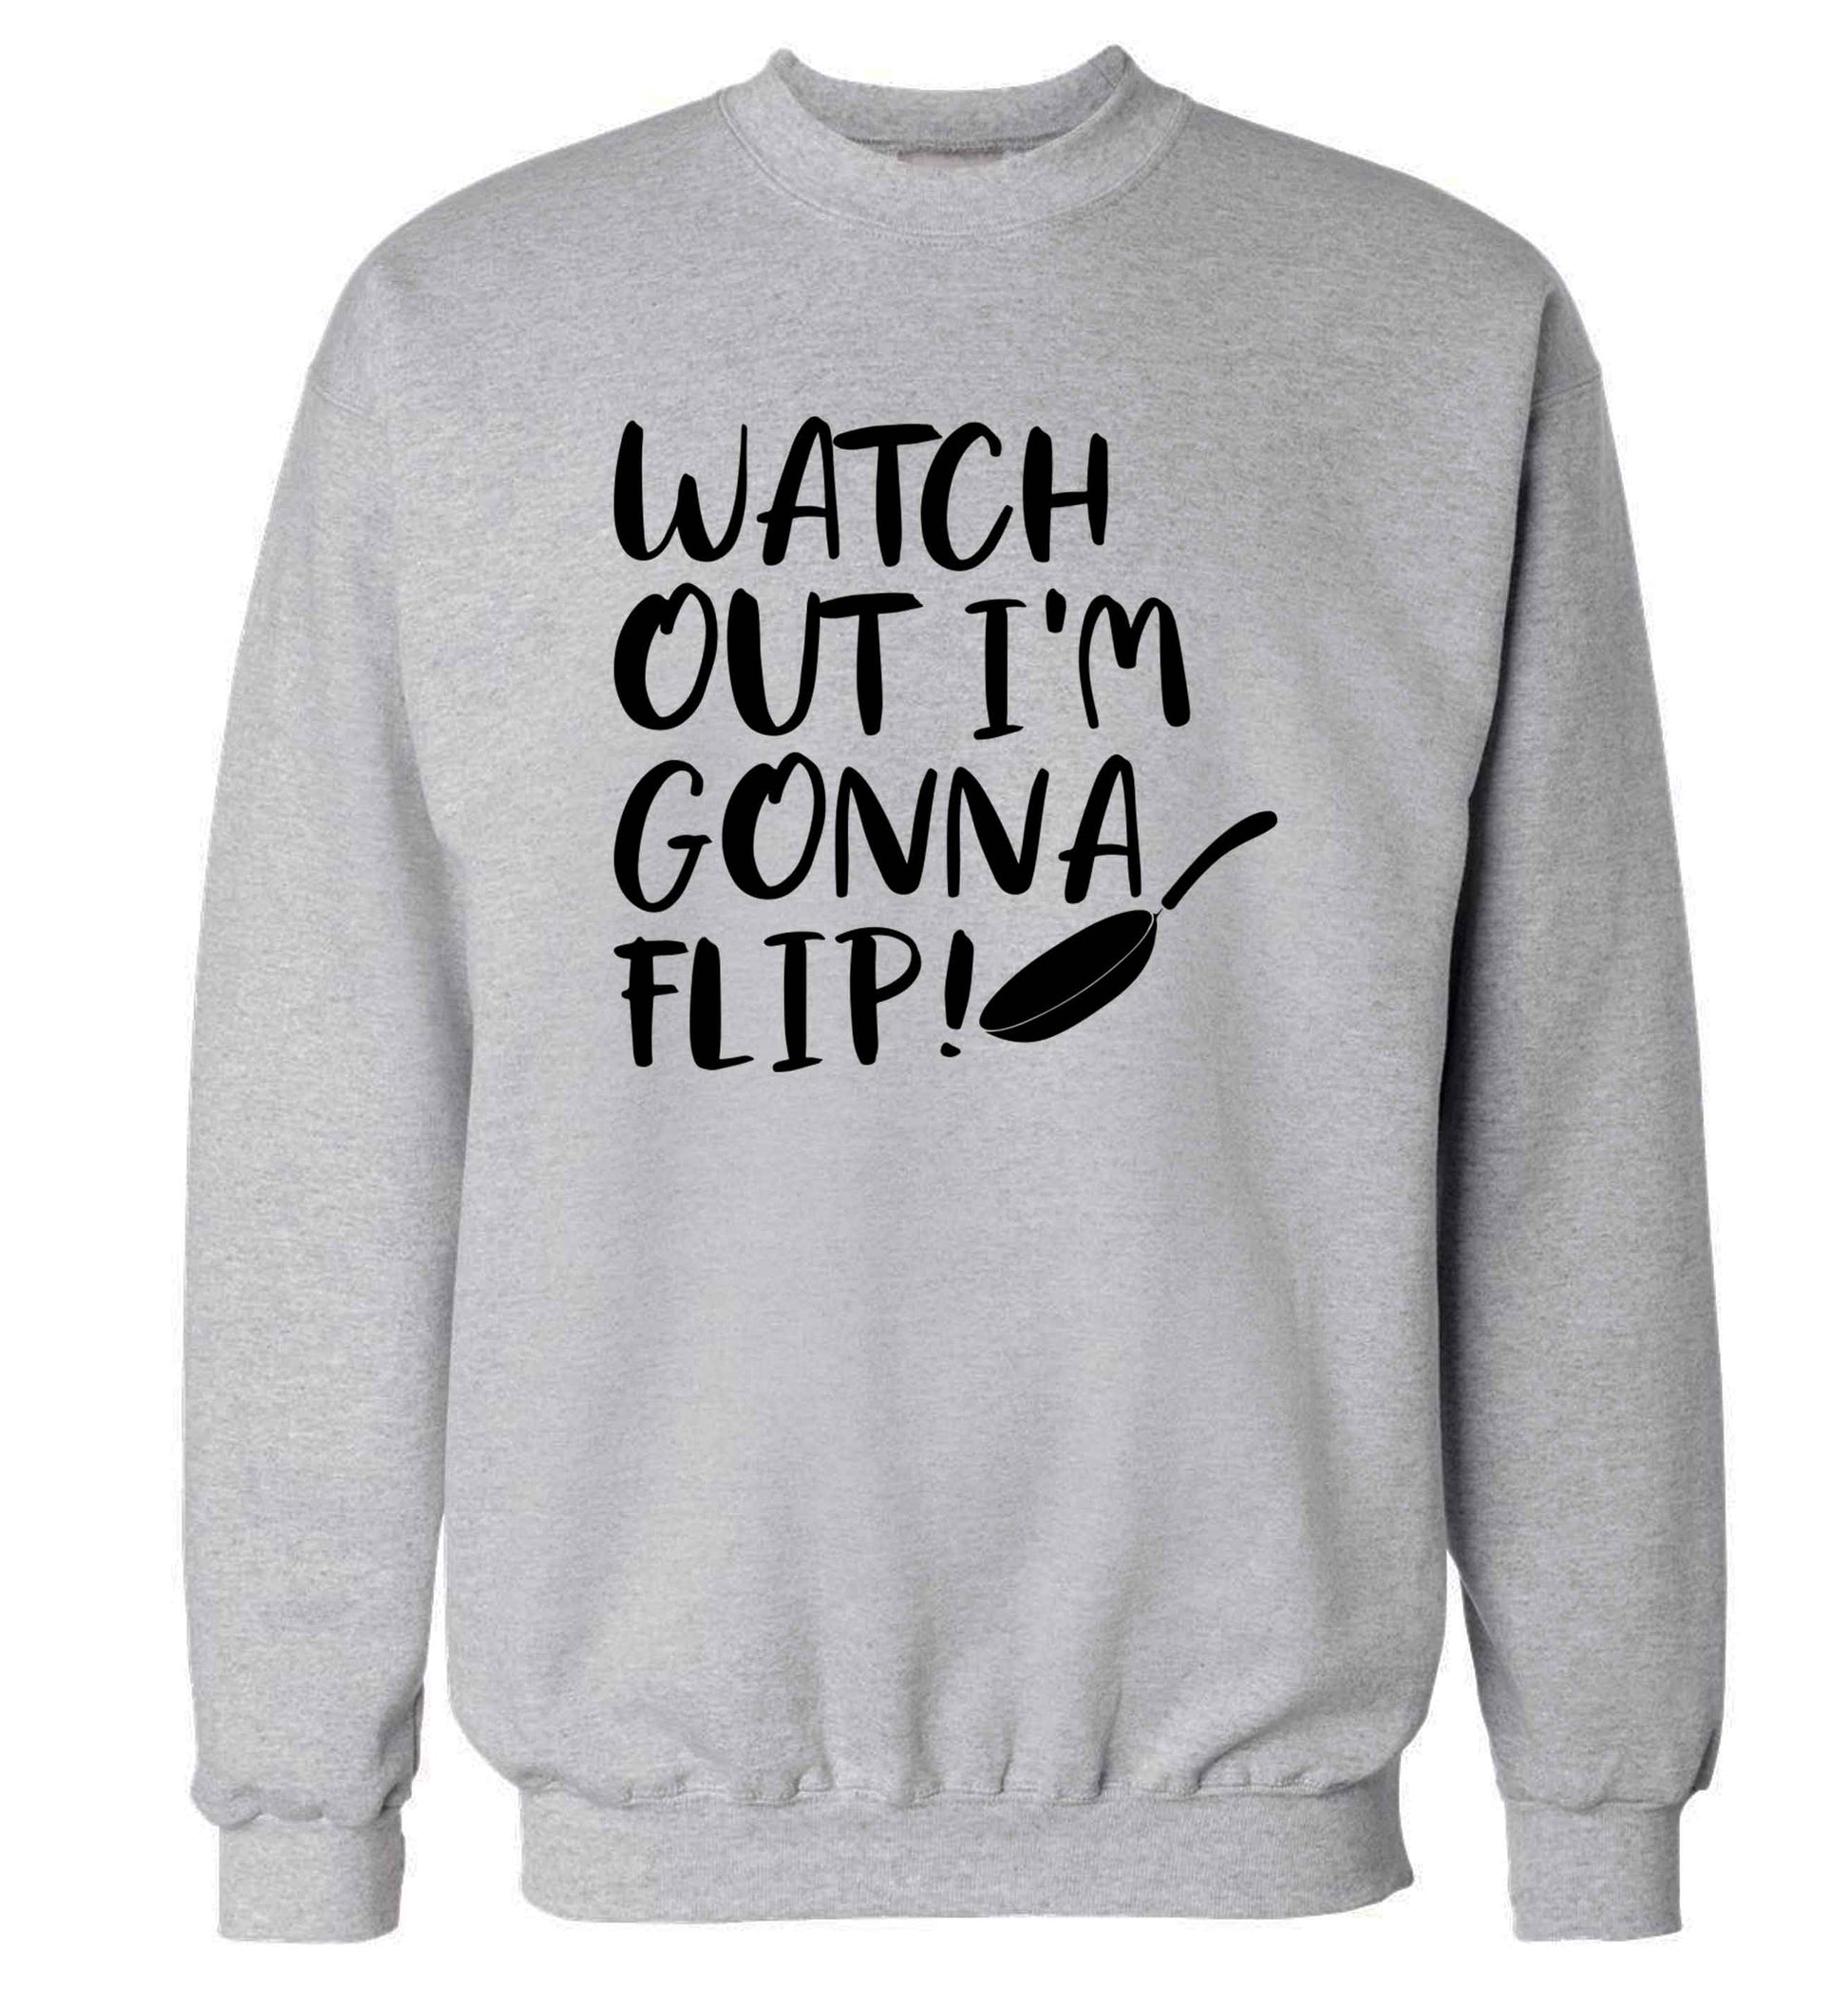 Watch out I'm gonna flip! adult's unisex grey sweater 2XL